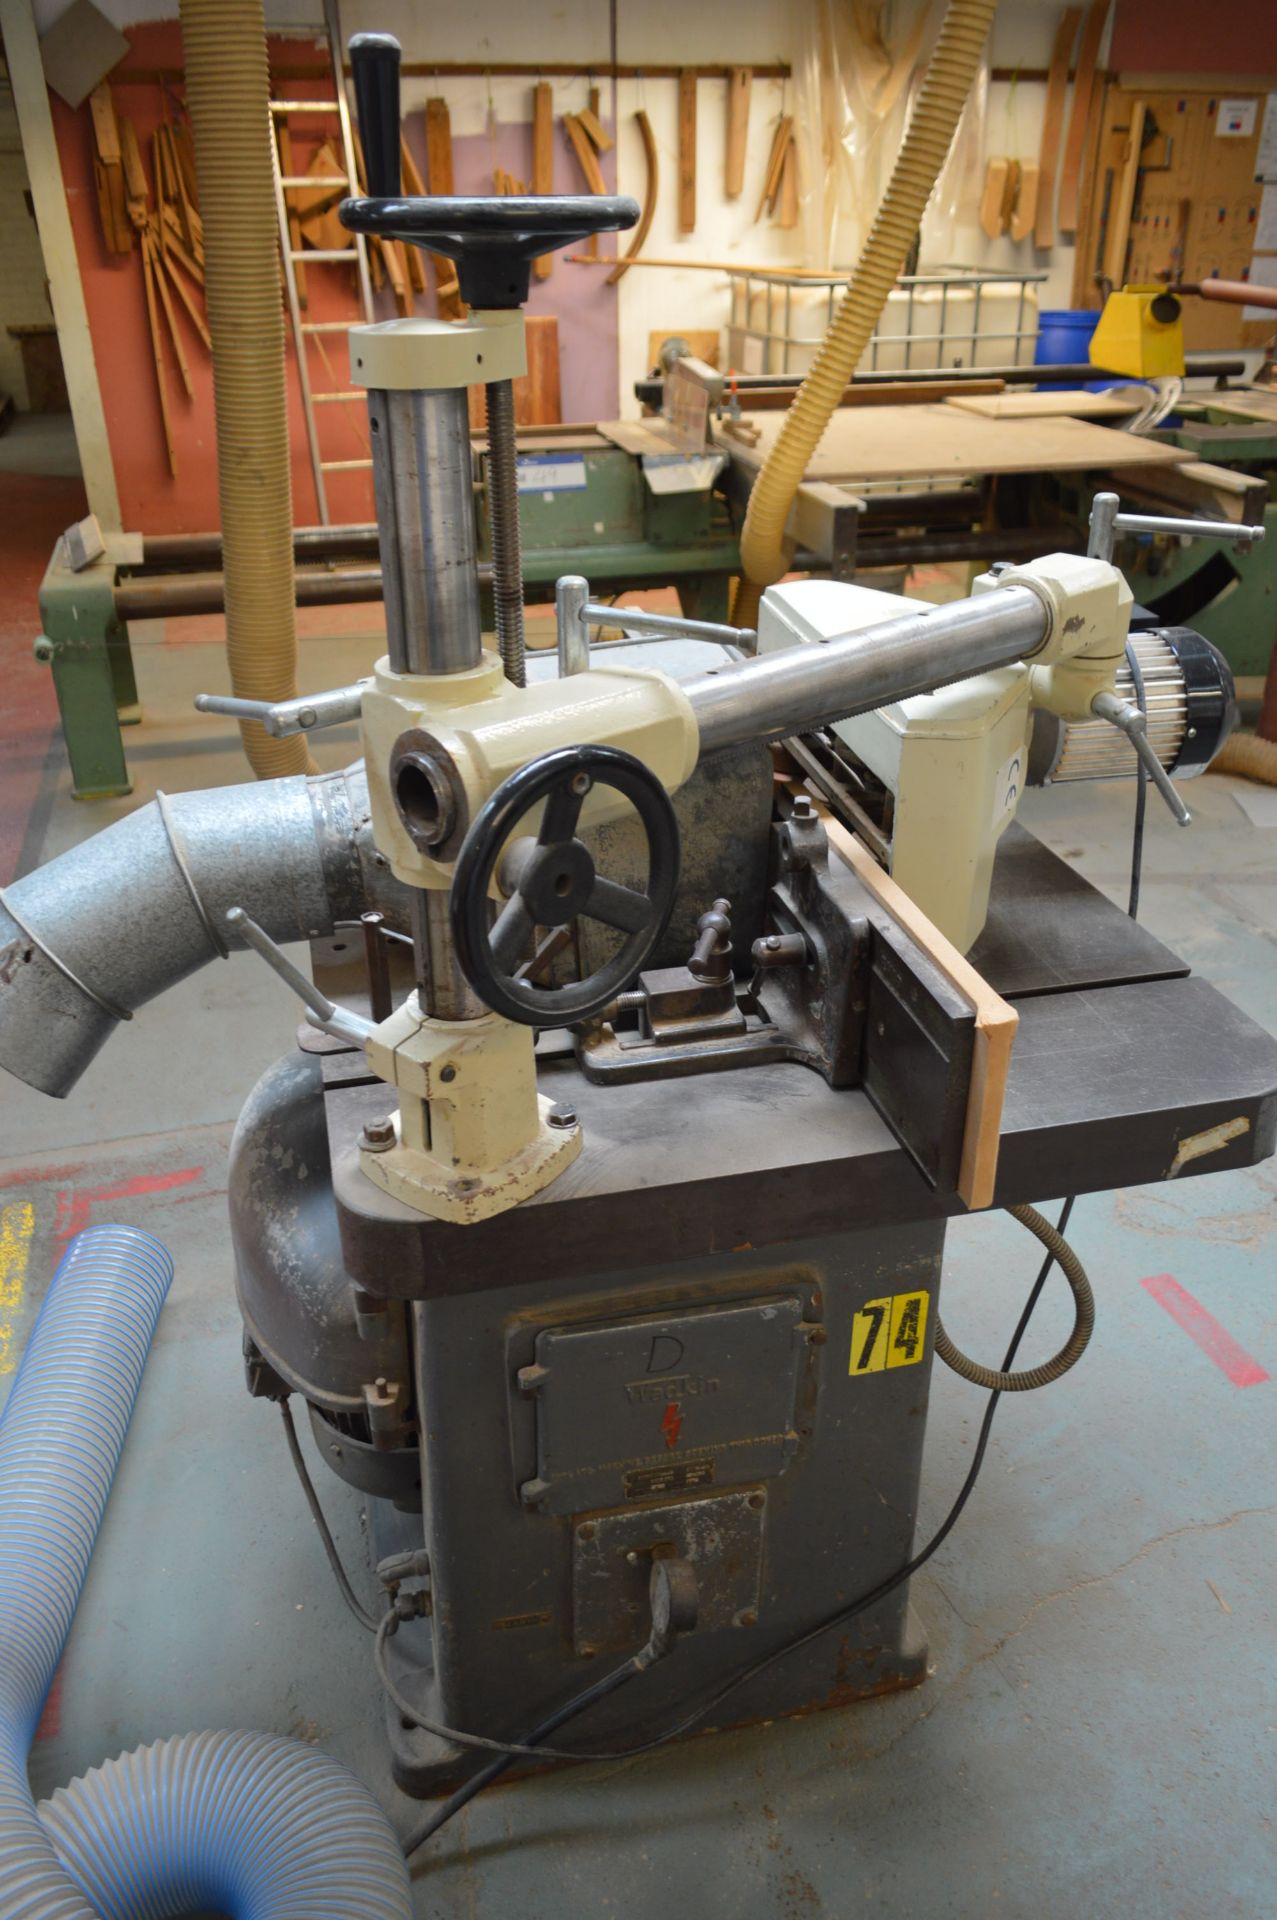 Wadkin EQ VERTICAL SPINDLE MOULDING MACHINE, serial no. 1522, test no. 61738, with power feed - Image 4 of 8